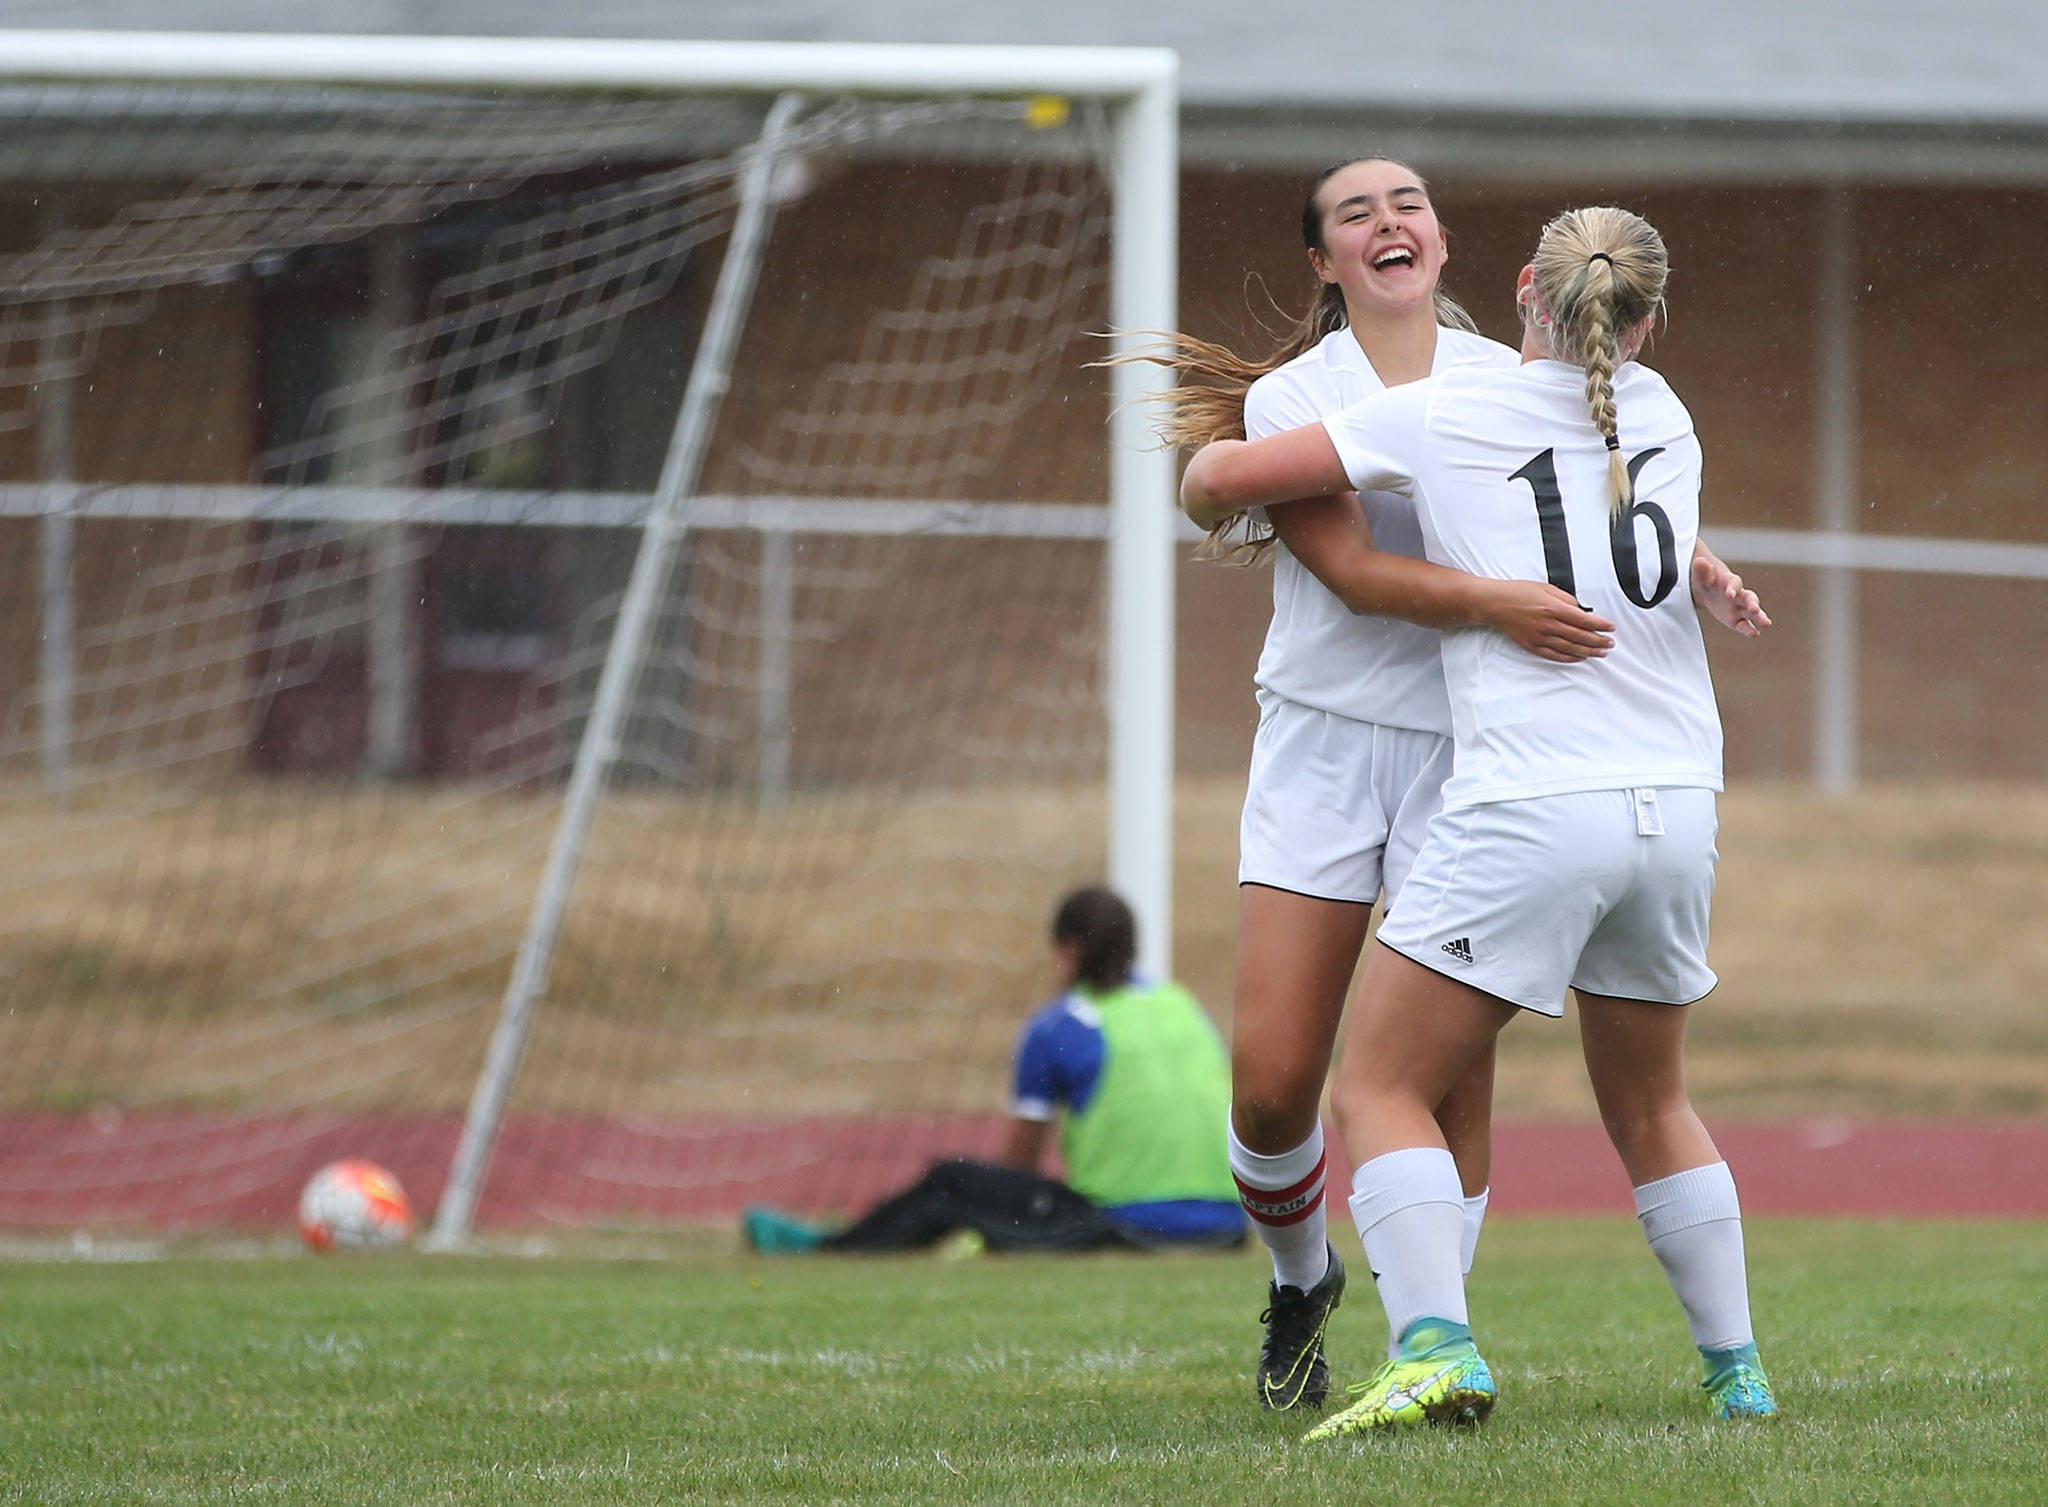 Lauren Bayne celebrates her long-distance goal with Avalon Renninger (16) as the Bellevue Christian goalkeeper can only look at the ball in the net. (Photo by John Fisken)